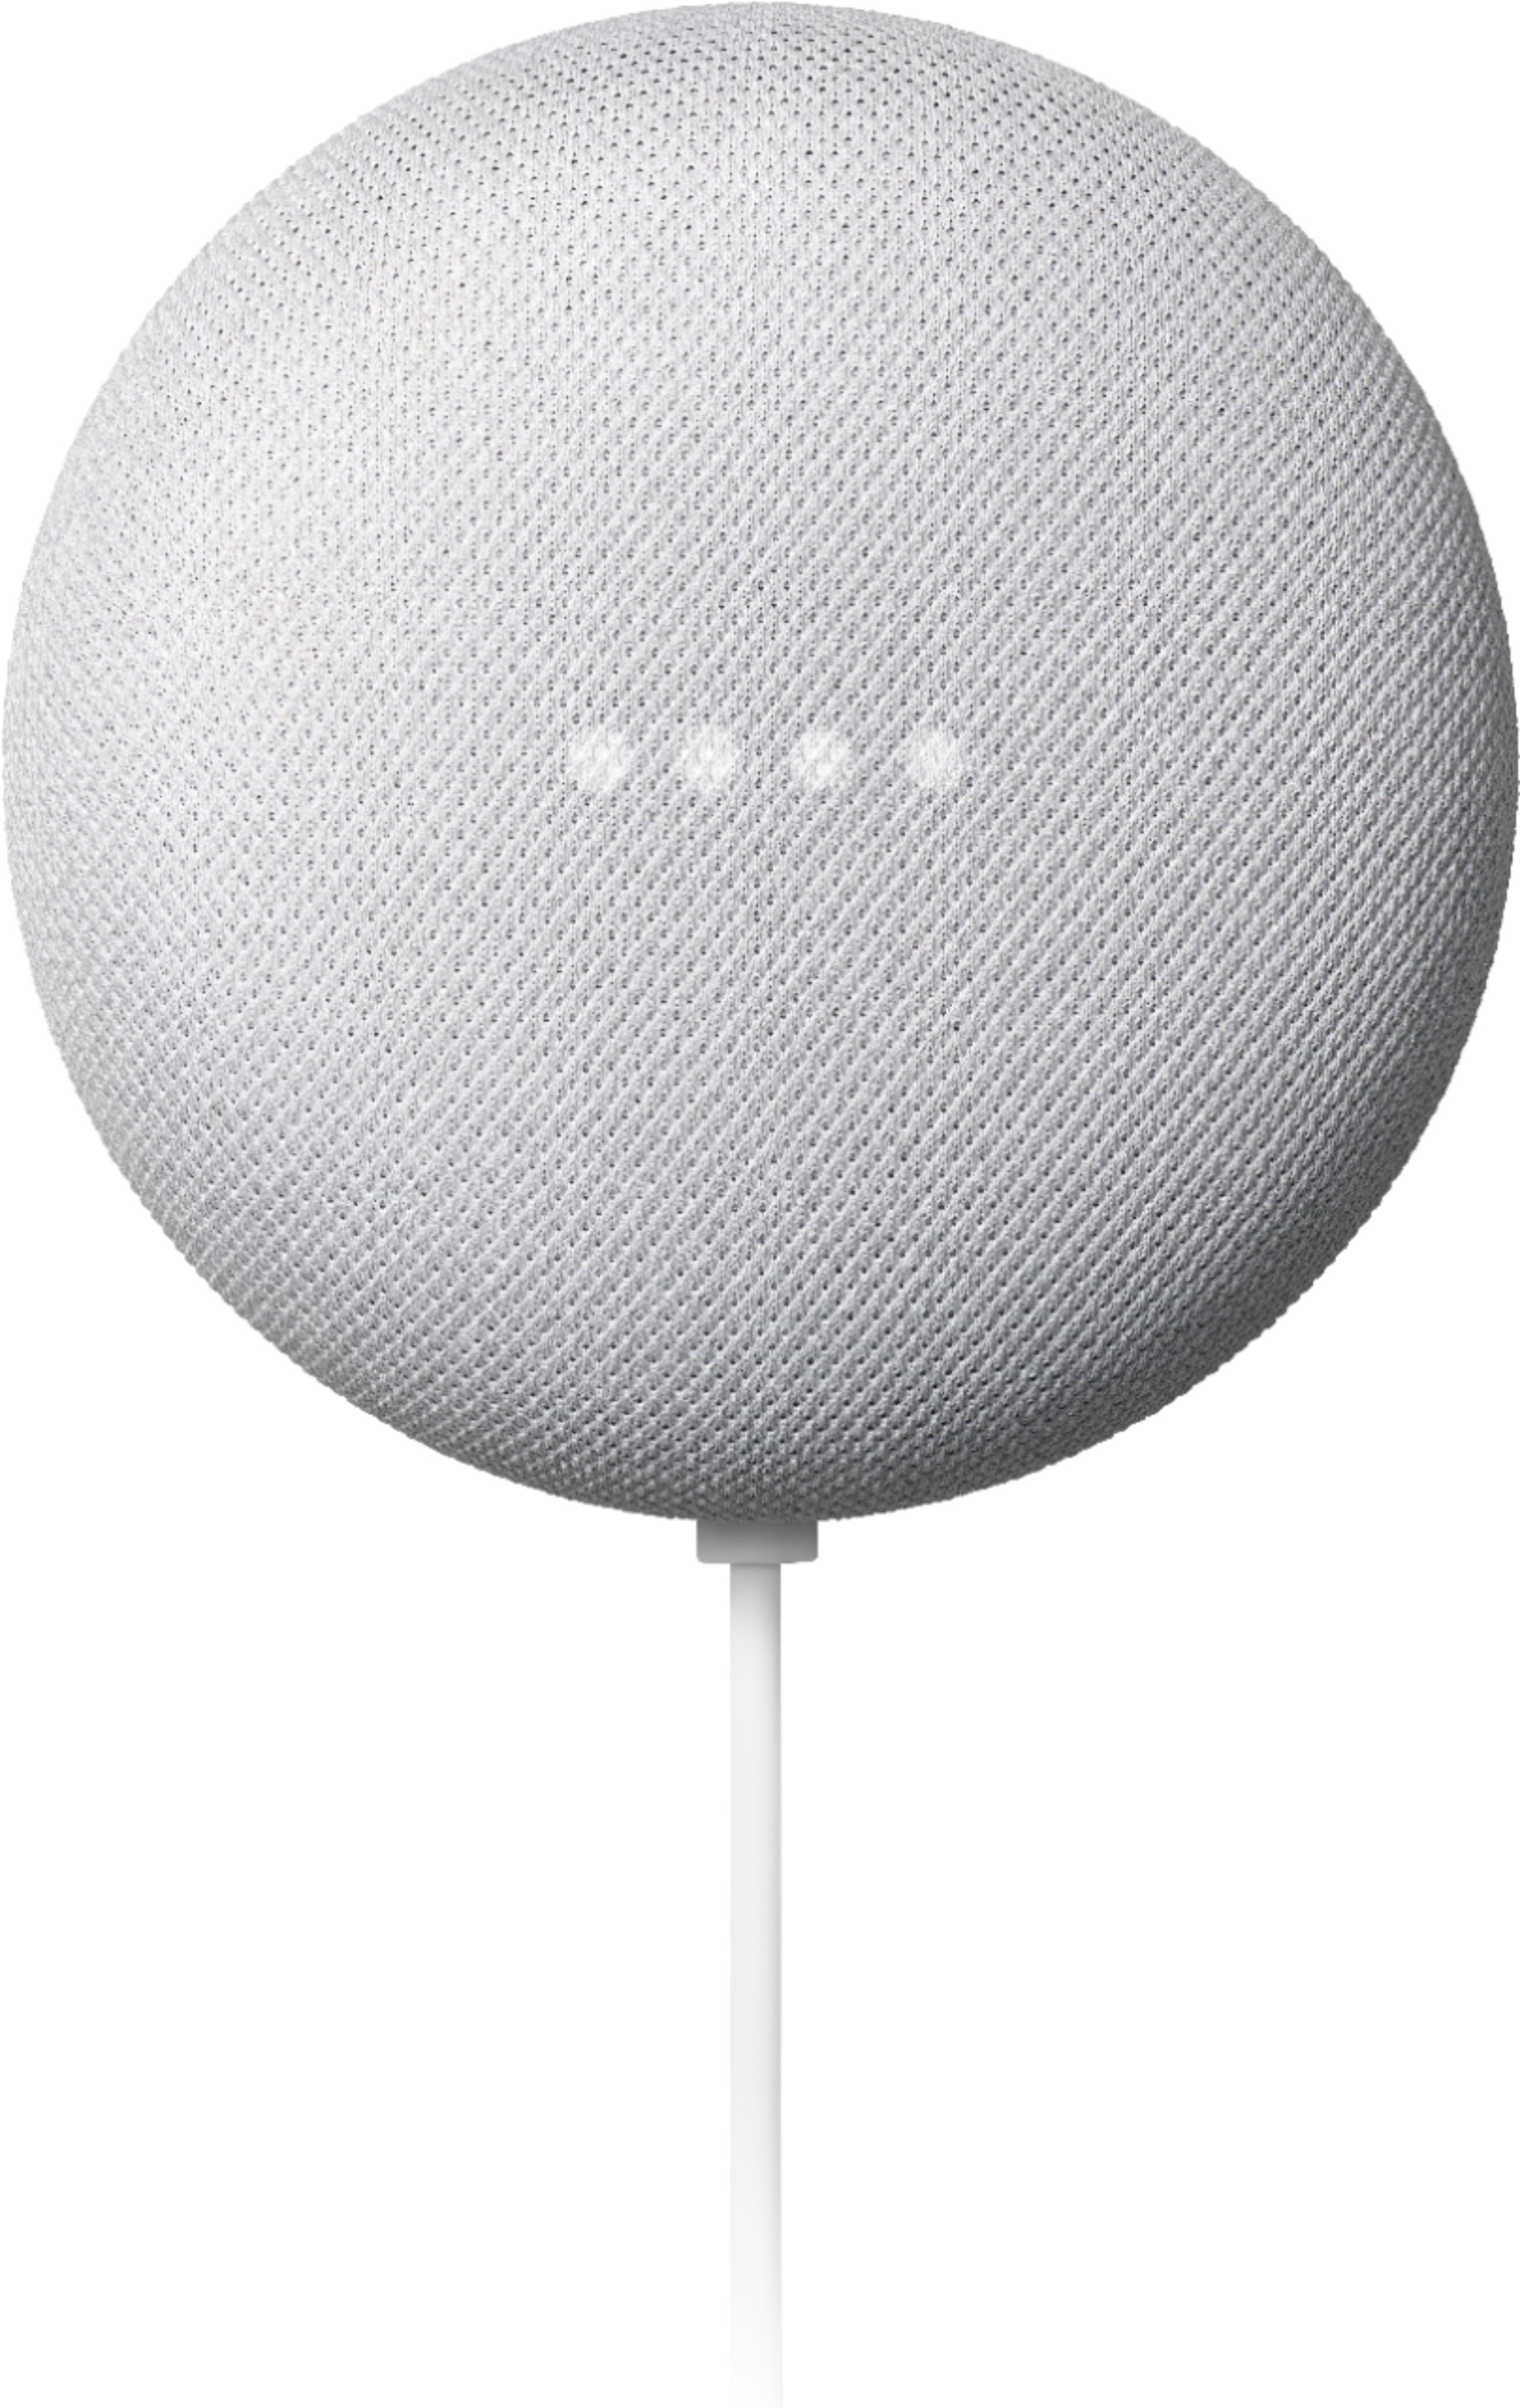 Nest Mini (2nd Generation) with Assistant Chalk GA00638-US - Best